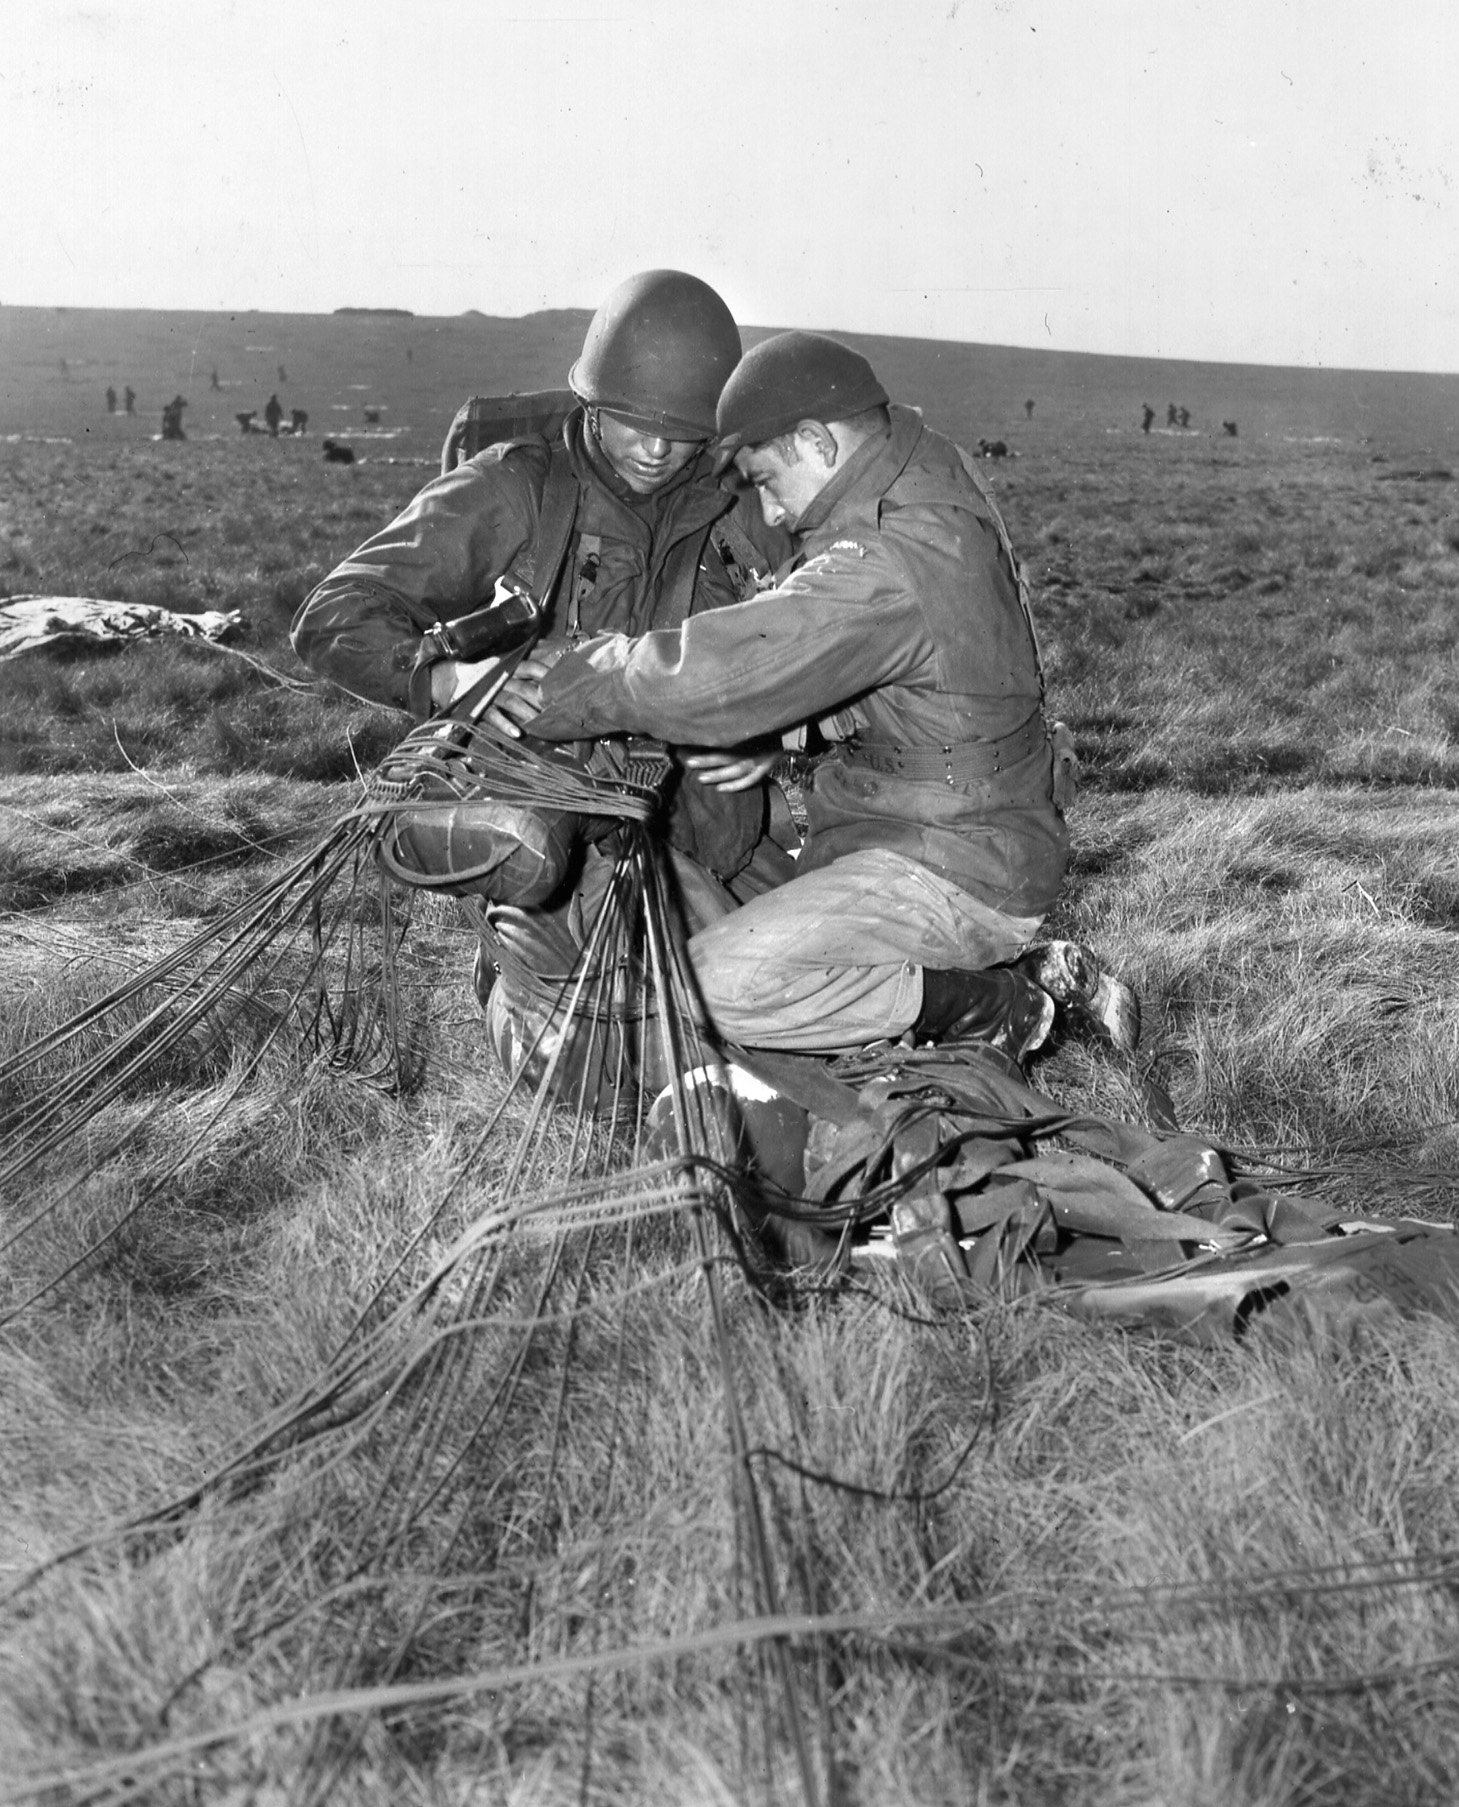 After coming to earth, a paratrooper of the 82nd Airborne Division helps his comrade disengage from the tangled lines of his parachute.